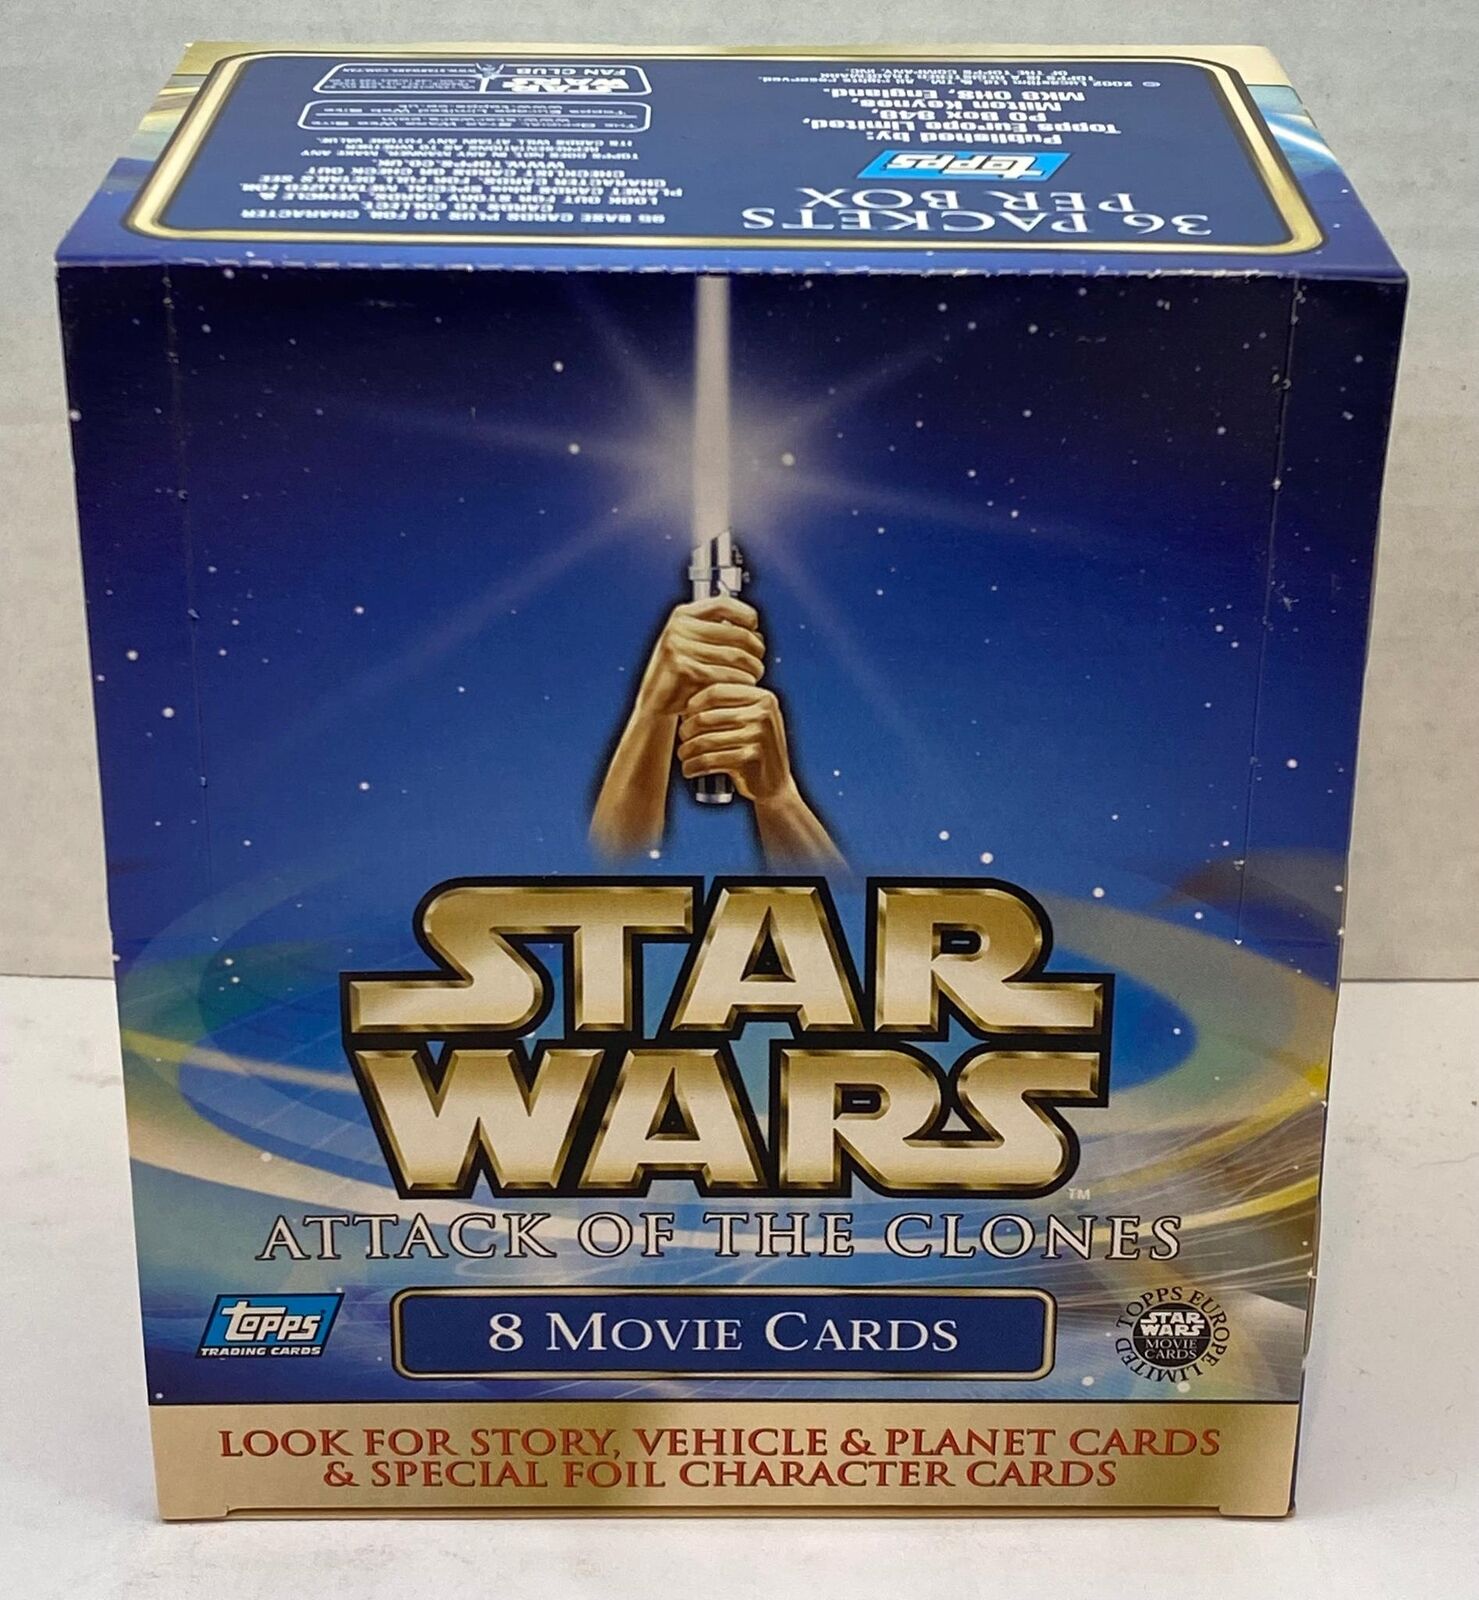 2002 Topps Star Wars Attack of the Clones Trading Card Box 36 Packs Unsealed